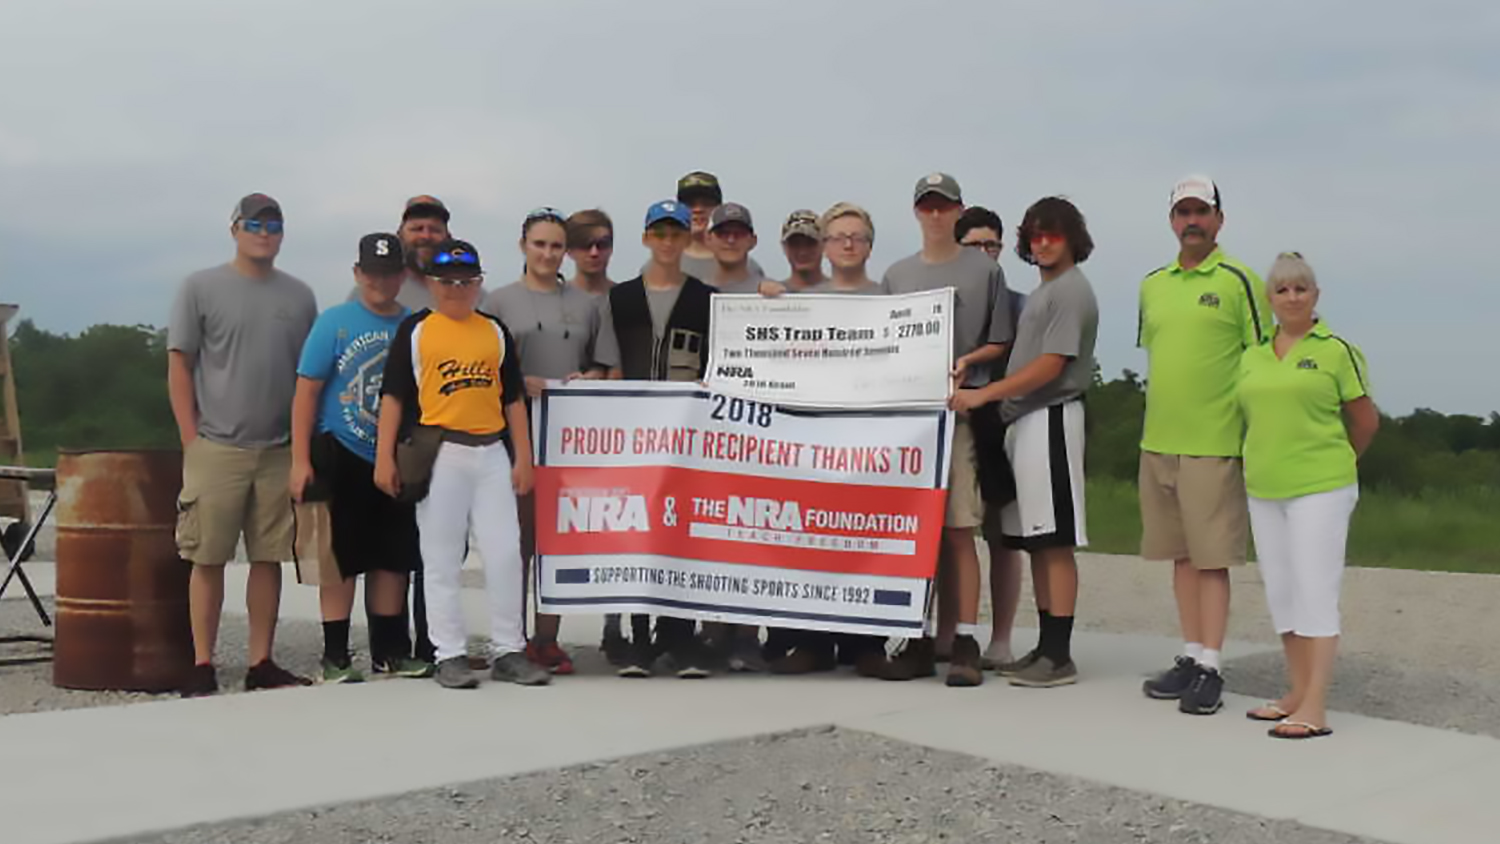 Areawide Media: The NRA Foundation awards $2,770 to Salem High School Trap Team